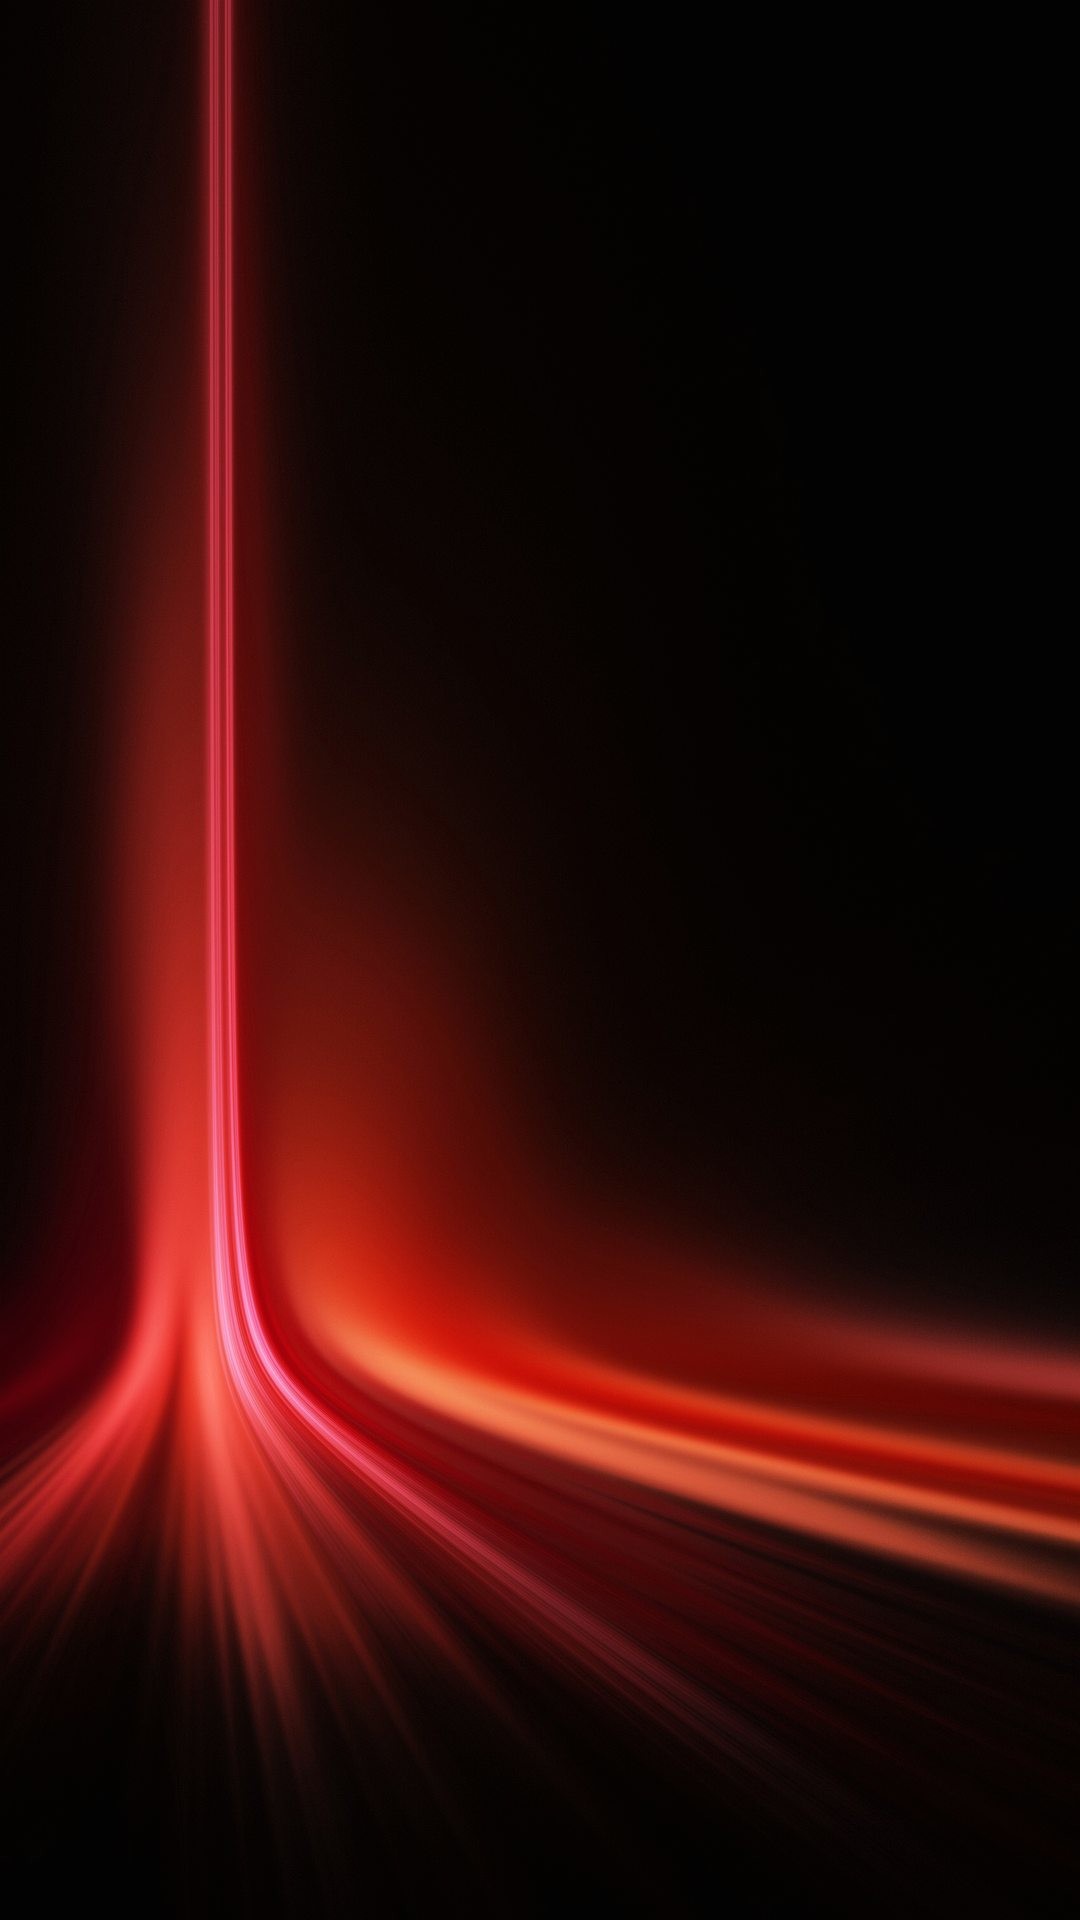 1080x1920 Image for Smartphone HD Background